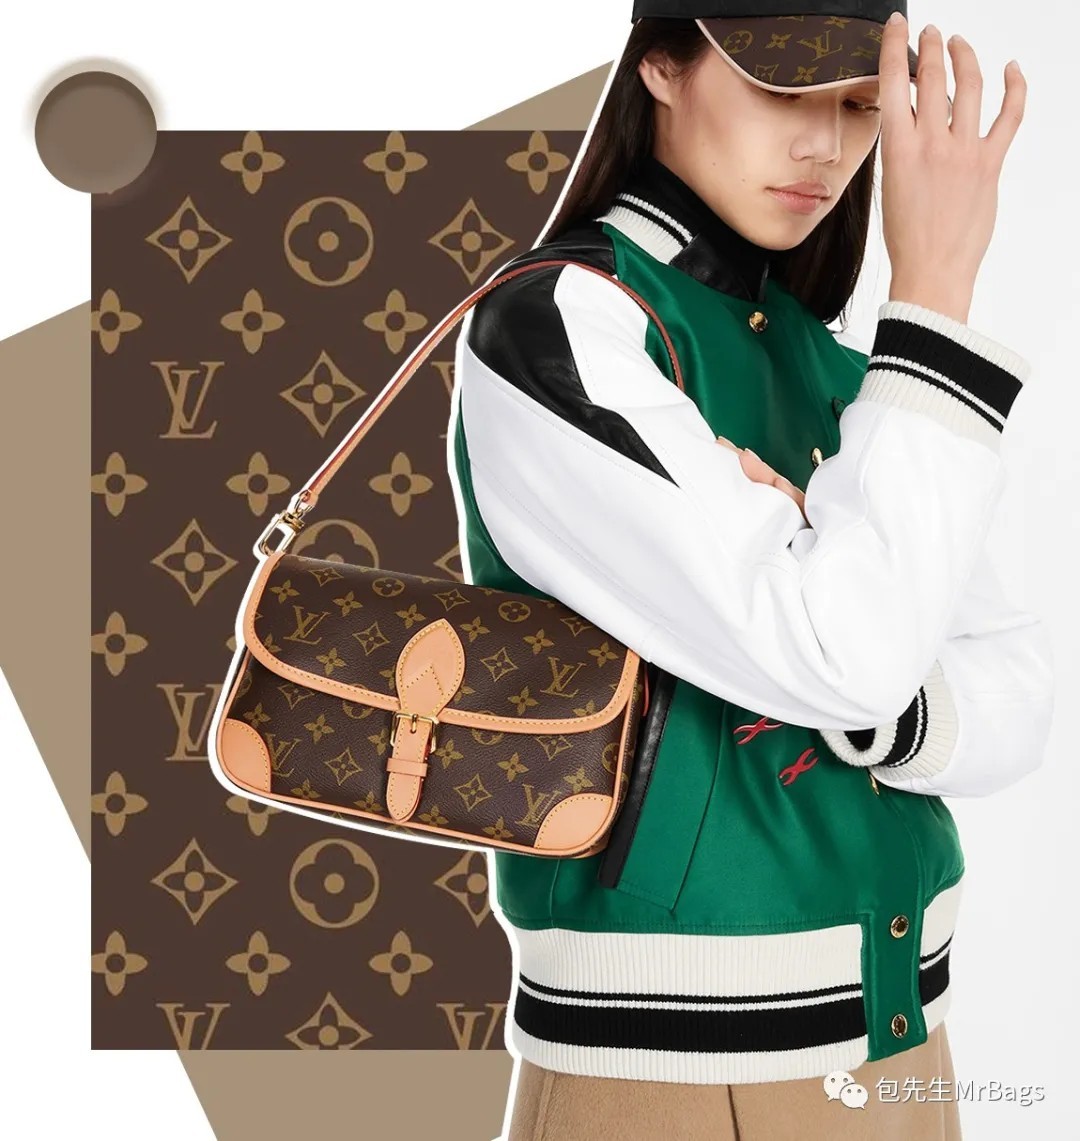 Top 12 most worthy of buying high-quality replica designer bags (2022 update)-Best Quality Fake Louis Vuitton Bag Online Store, Replica designer bag ru